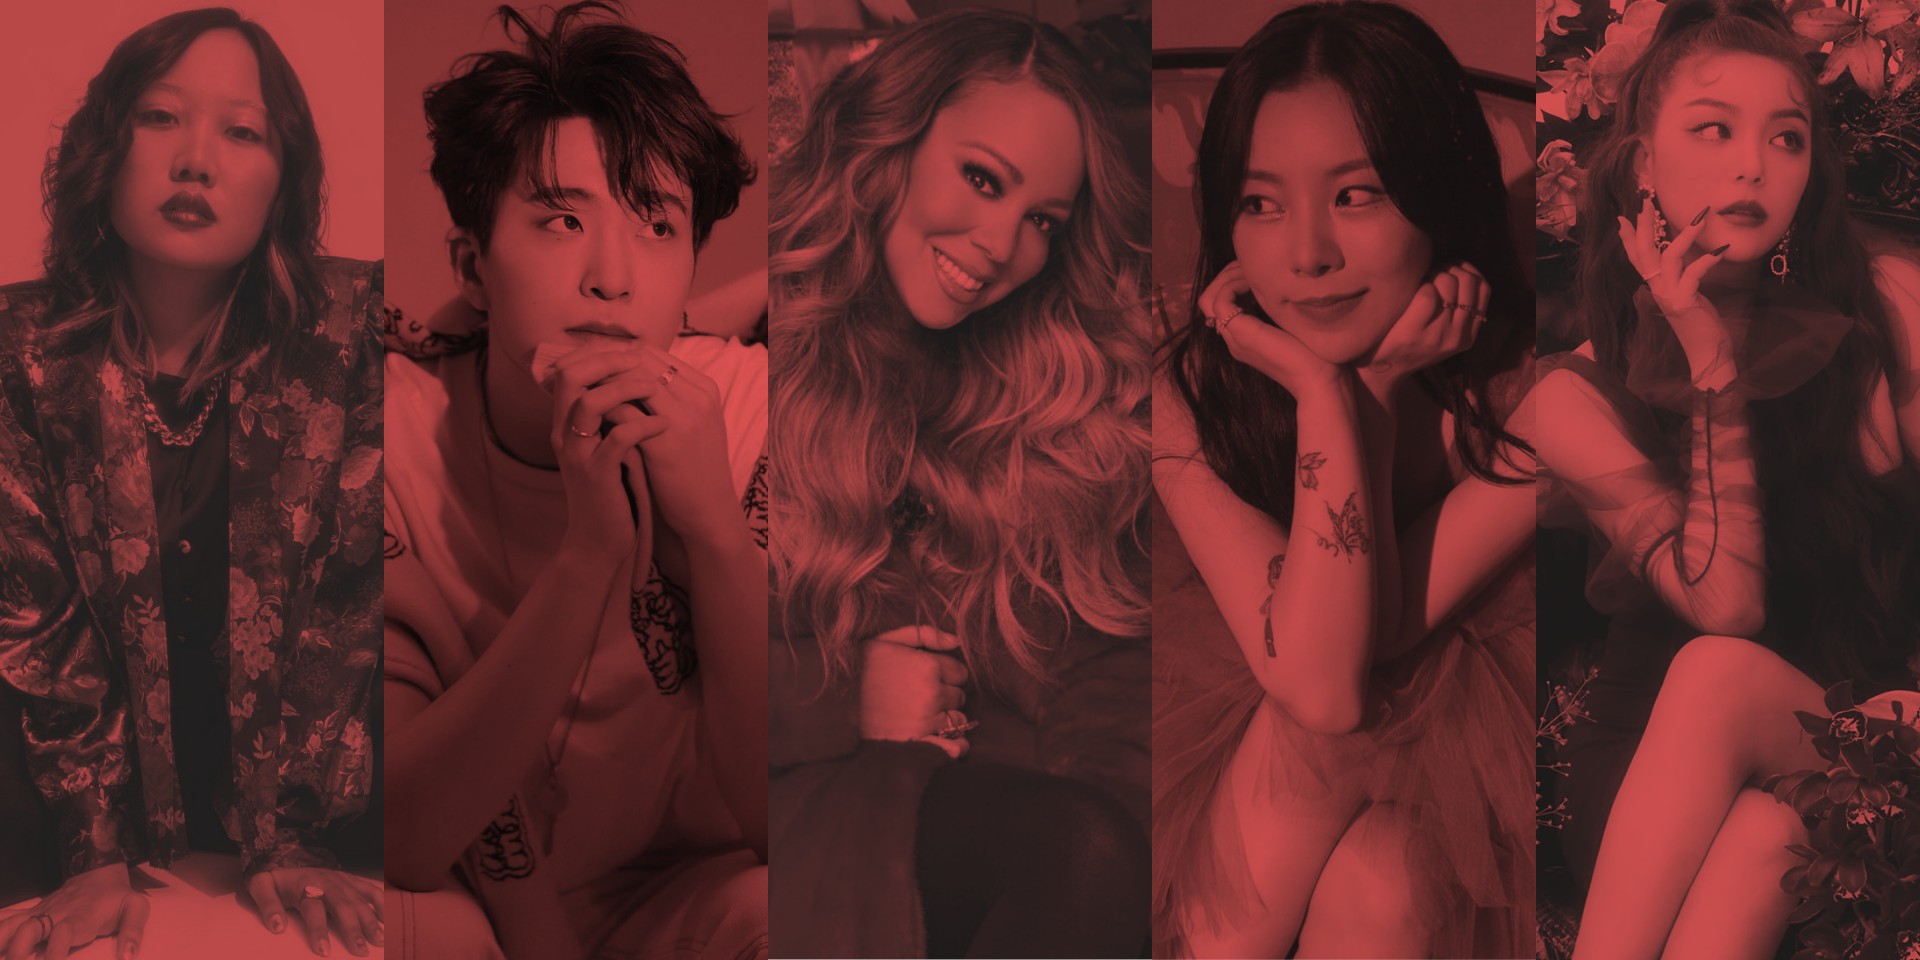 Holiday songs to welcome the festive season — GOT7's Youngjae, ena mori, Mariah Carey, MAMAMOO's Wheein, Ailee, and more